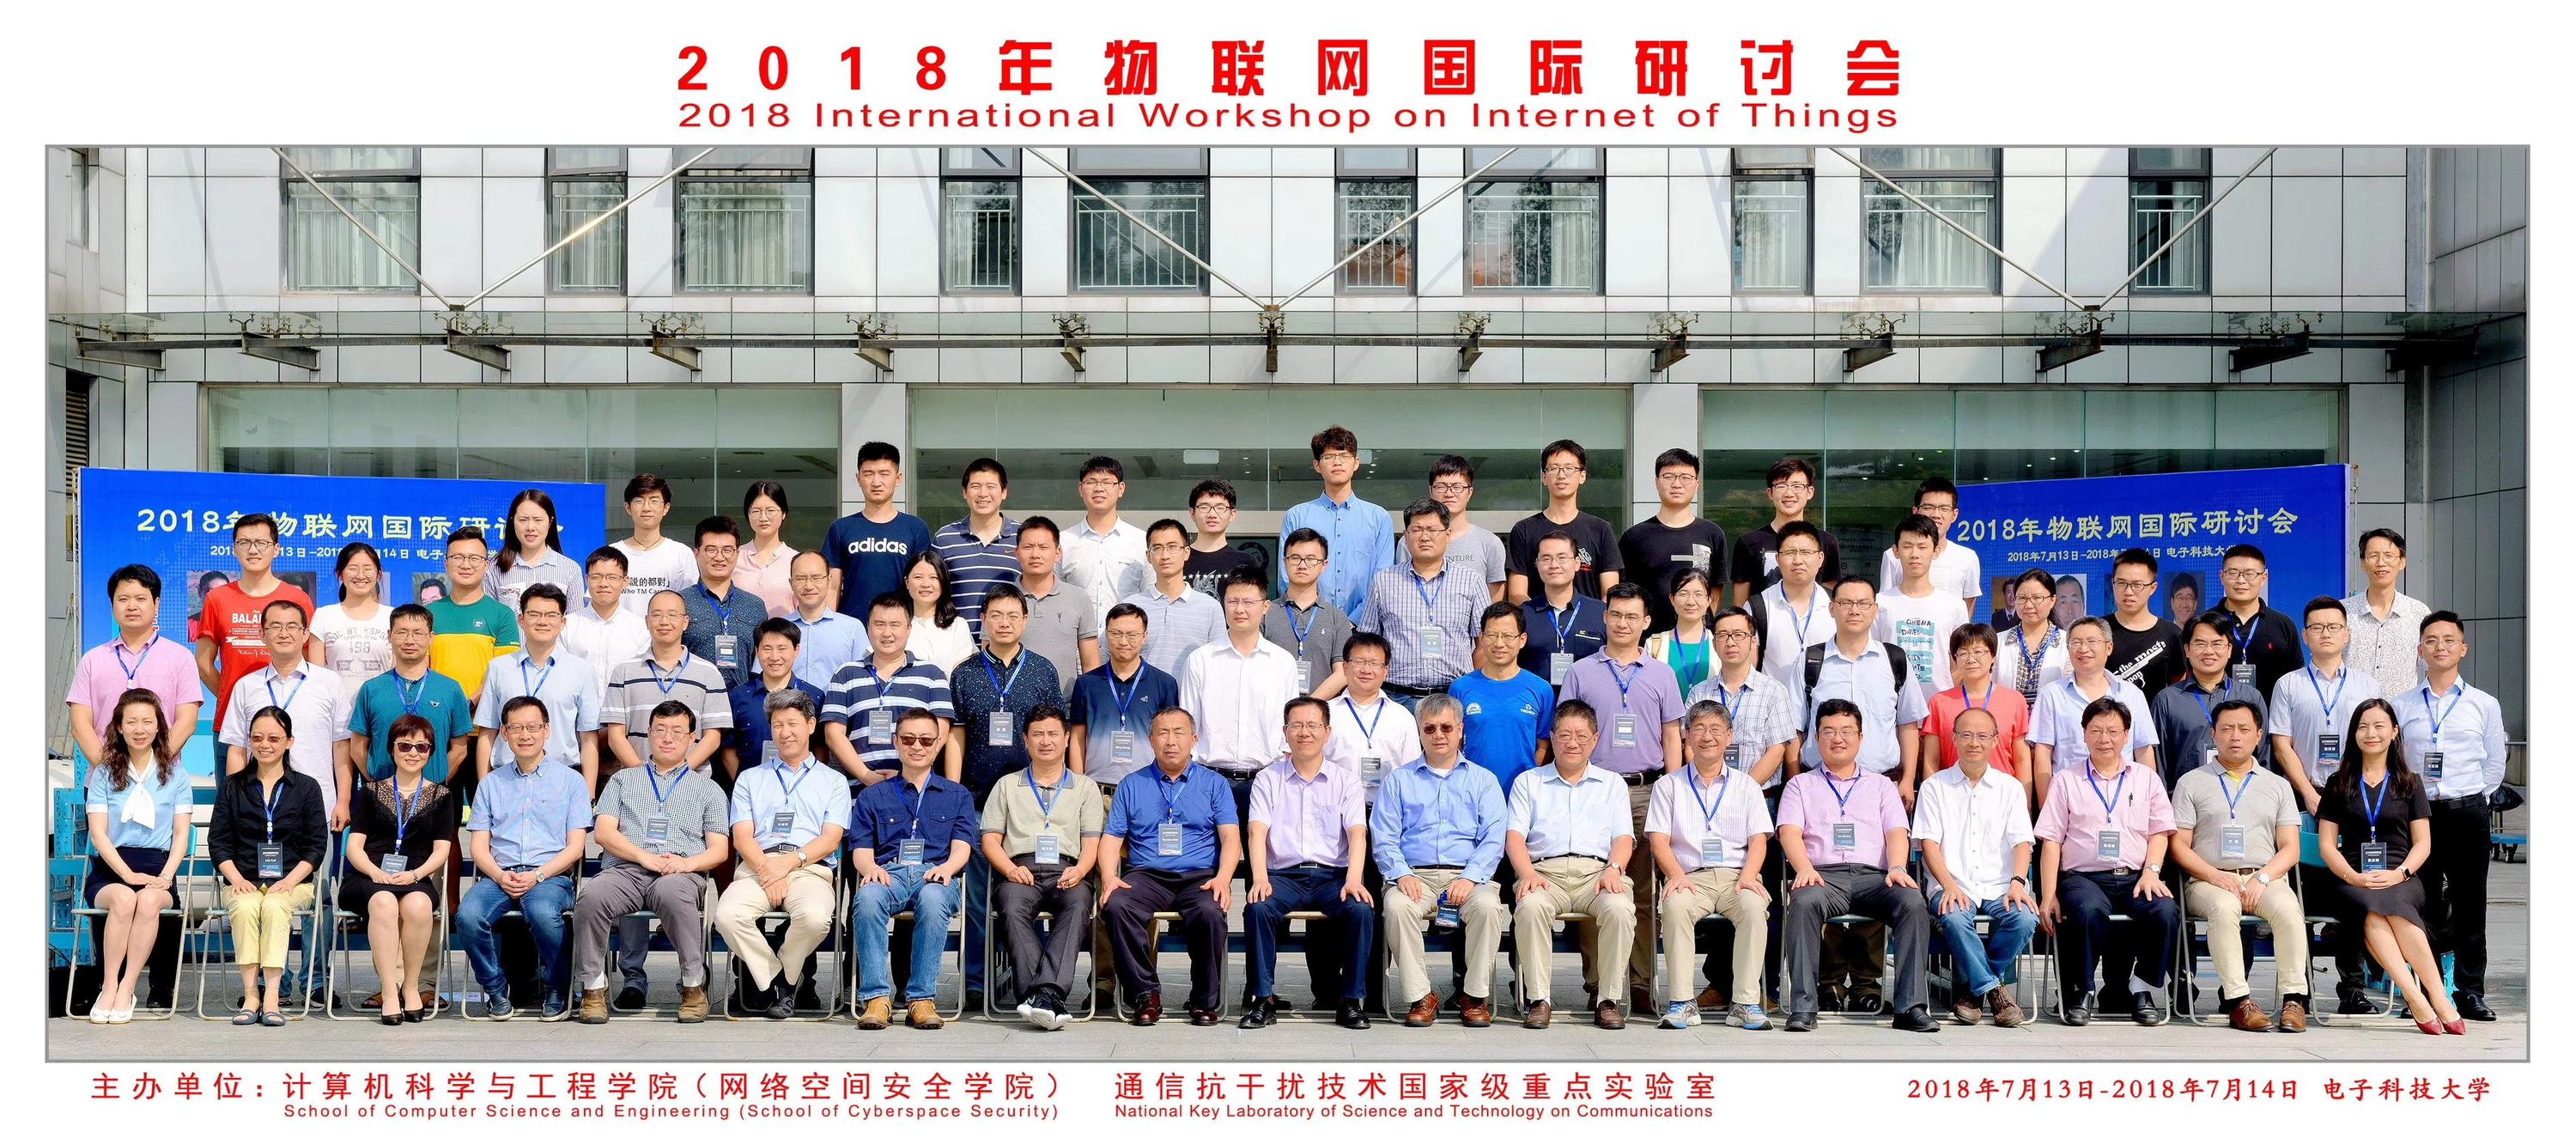 Prof. Shen and many BBCR members attended 2018 International Workshop on Internet of Things